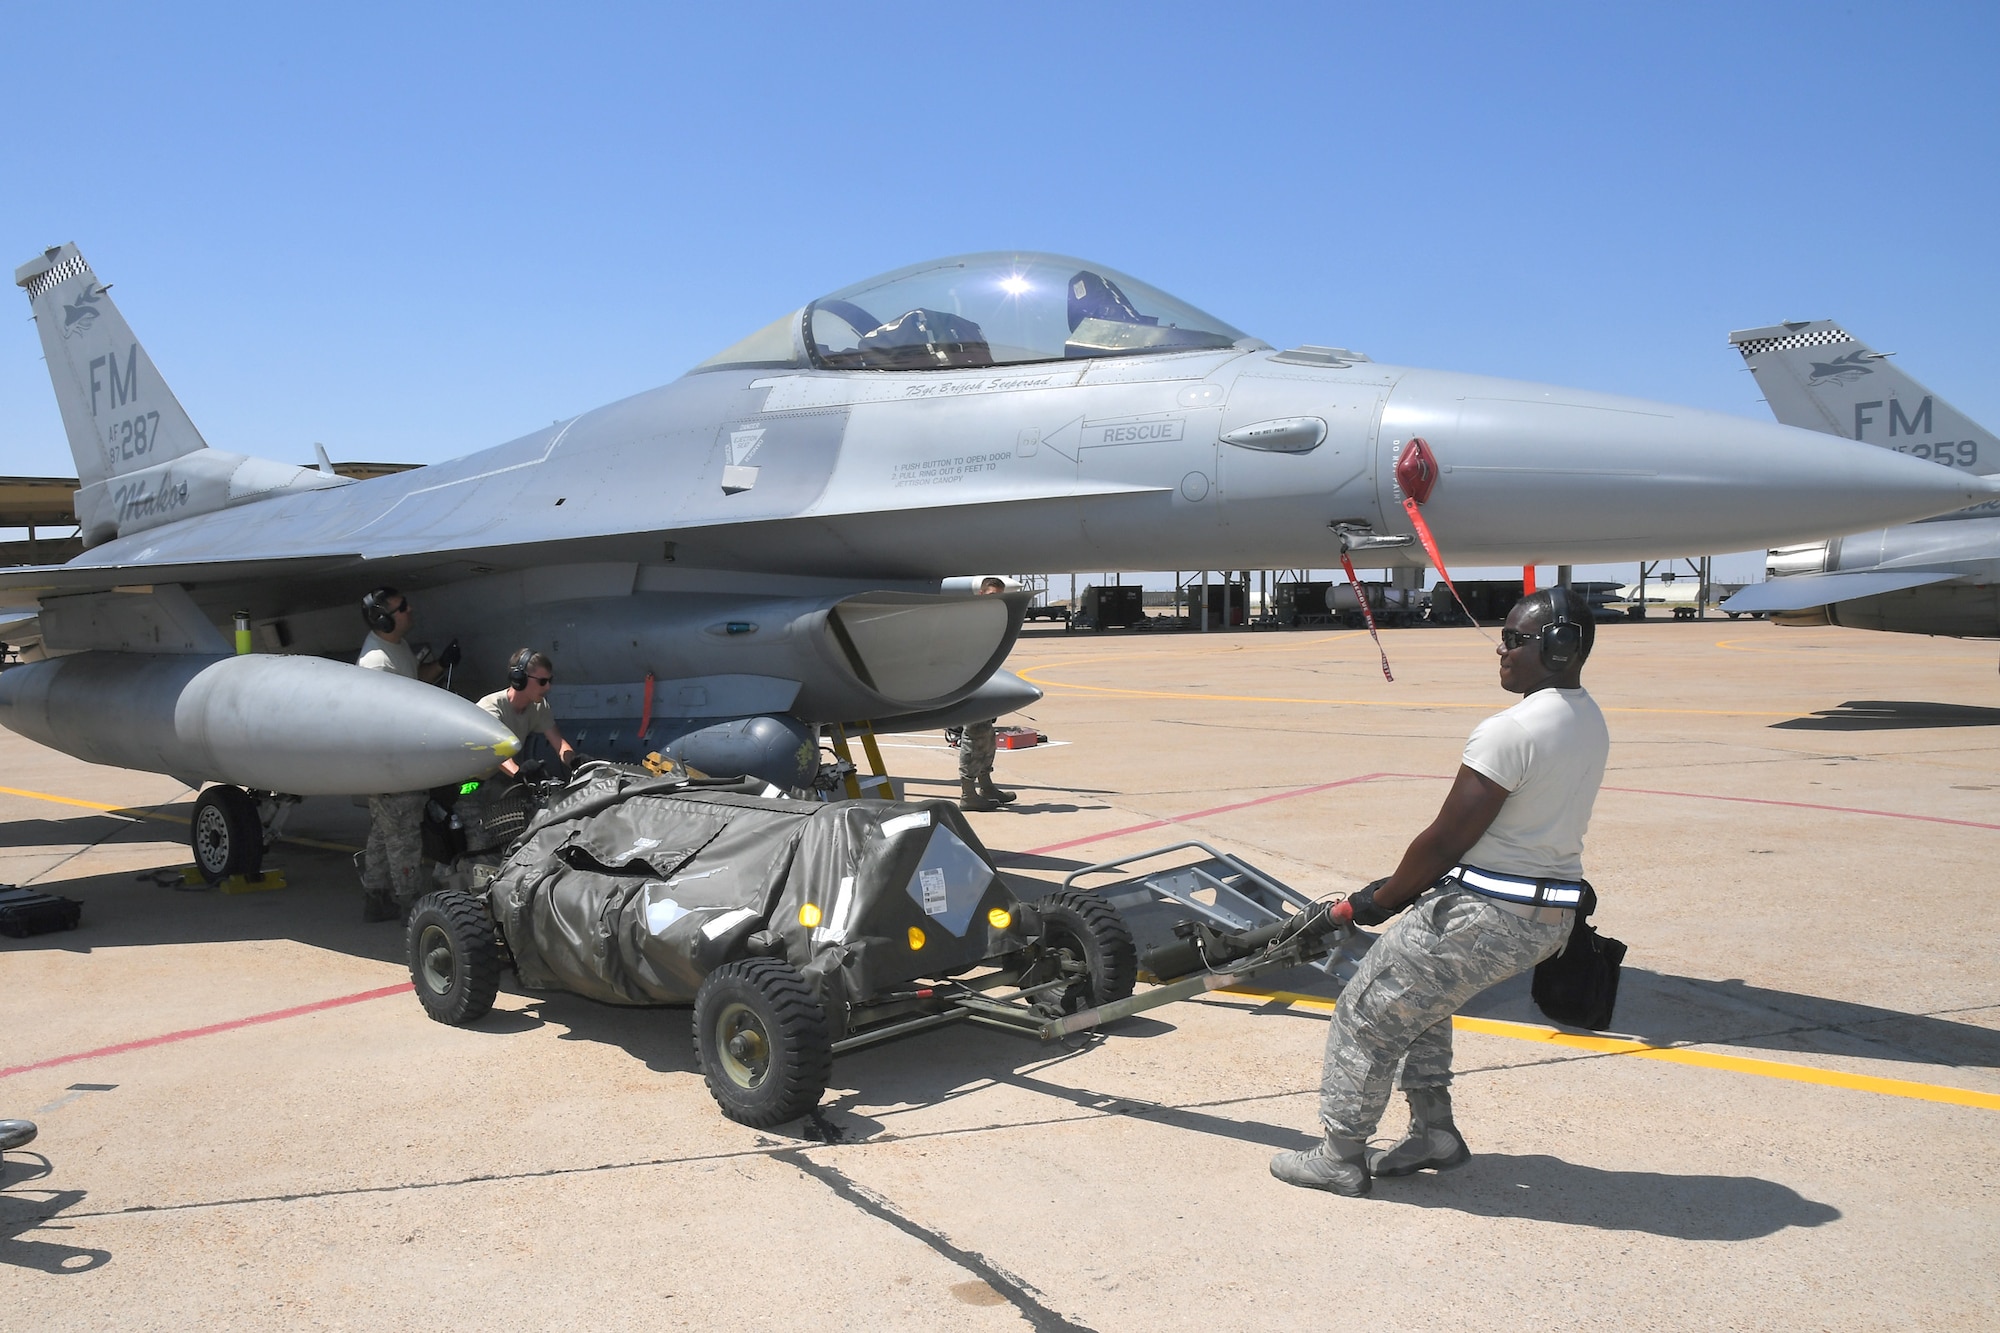 (Left to right) Senior Airman Jeremy Watson and Tech. Sgt. Darian Willis, 482nd Aircraft Maintenance Squadron, reposition an ammo cart for loading target rounds on an F-16, Aug. 8, 2018, at Hill Air Force Base, Utah. The 482nd AMXS from Homestead Air Reserve Base, Fla., was at Hill AFB to participate in the Air Force’s Weapon System Evaluation Program known as Combat Hammer. (U.S. Air Force photo by Todd Cromar)